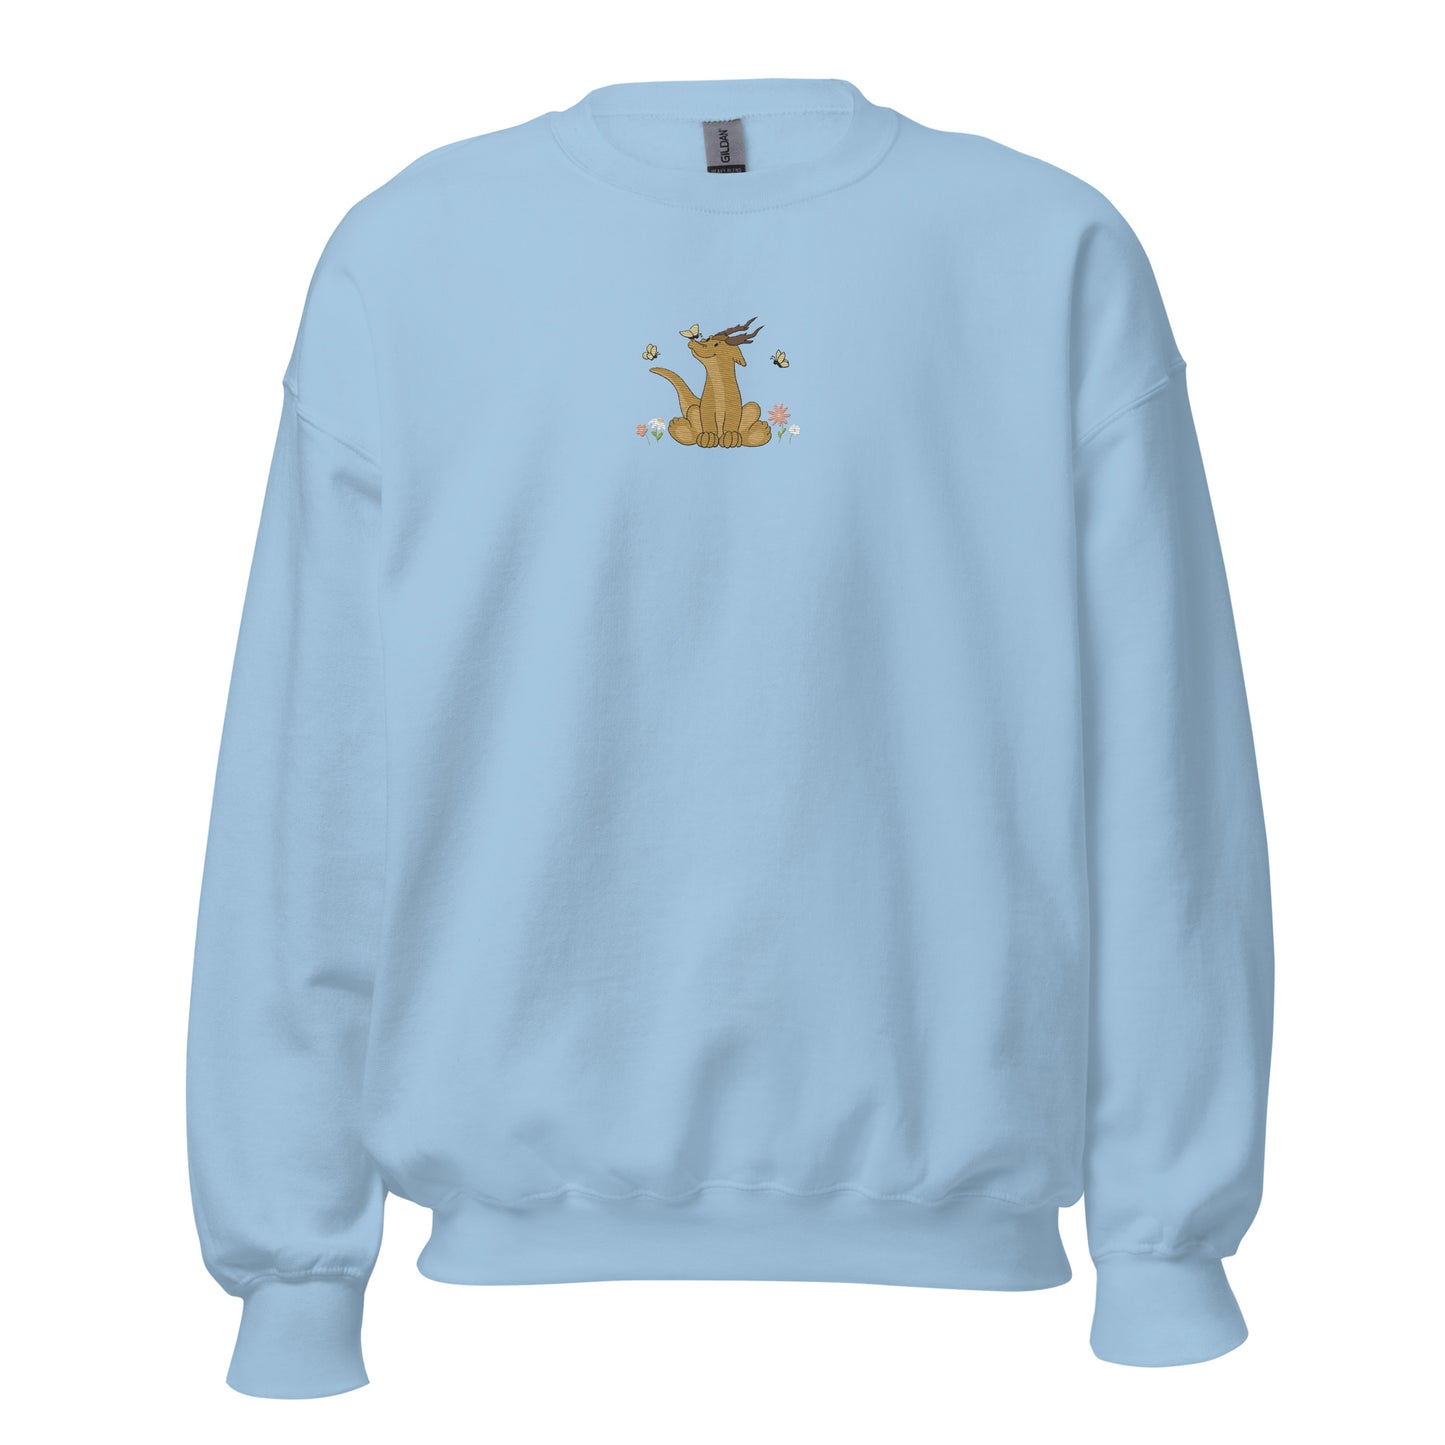 Butterfly Dragon Embroidered Sweatshirt